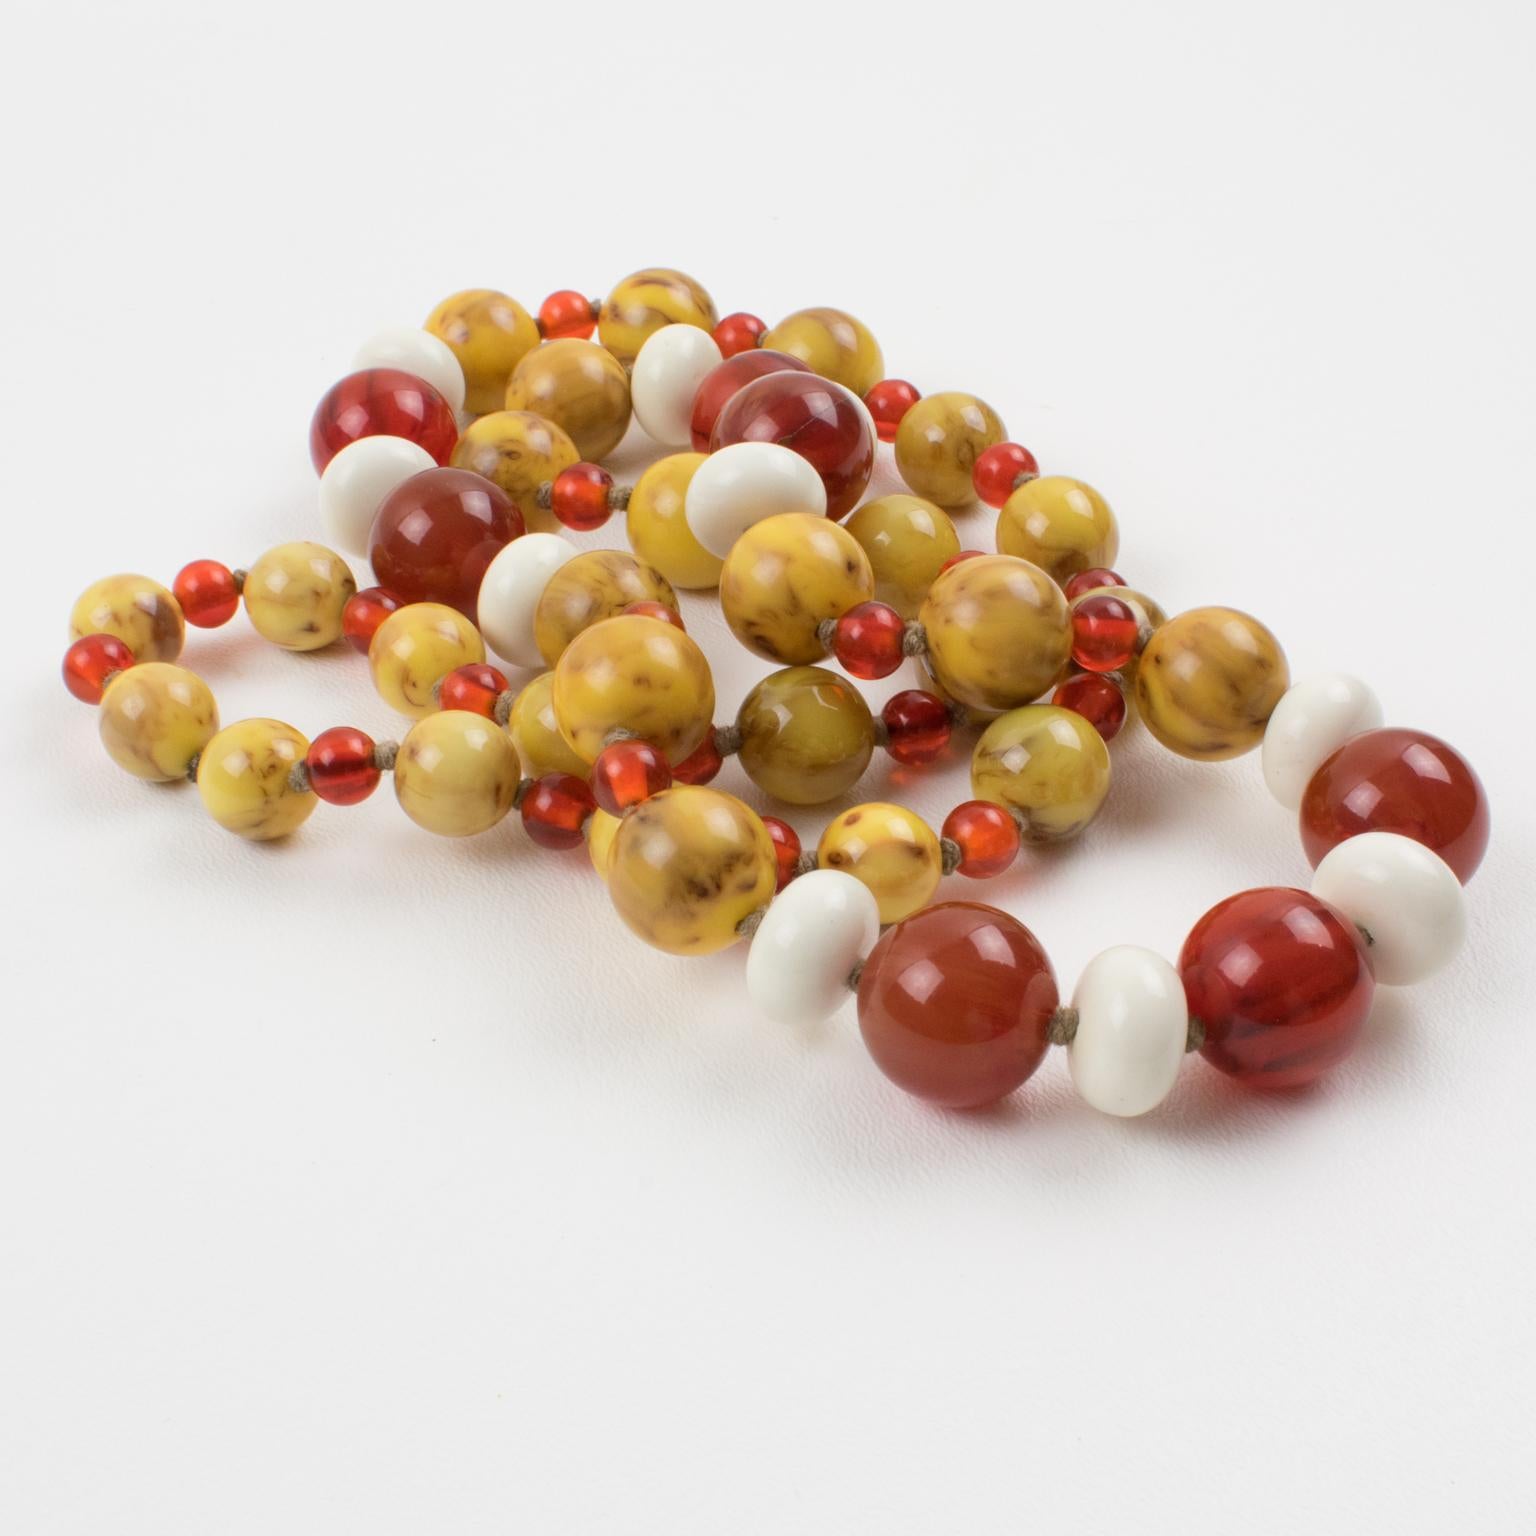 Bakelite and Lucite Extra Long Necklace Brown and Beige Fall Colors For Sale 4